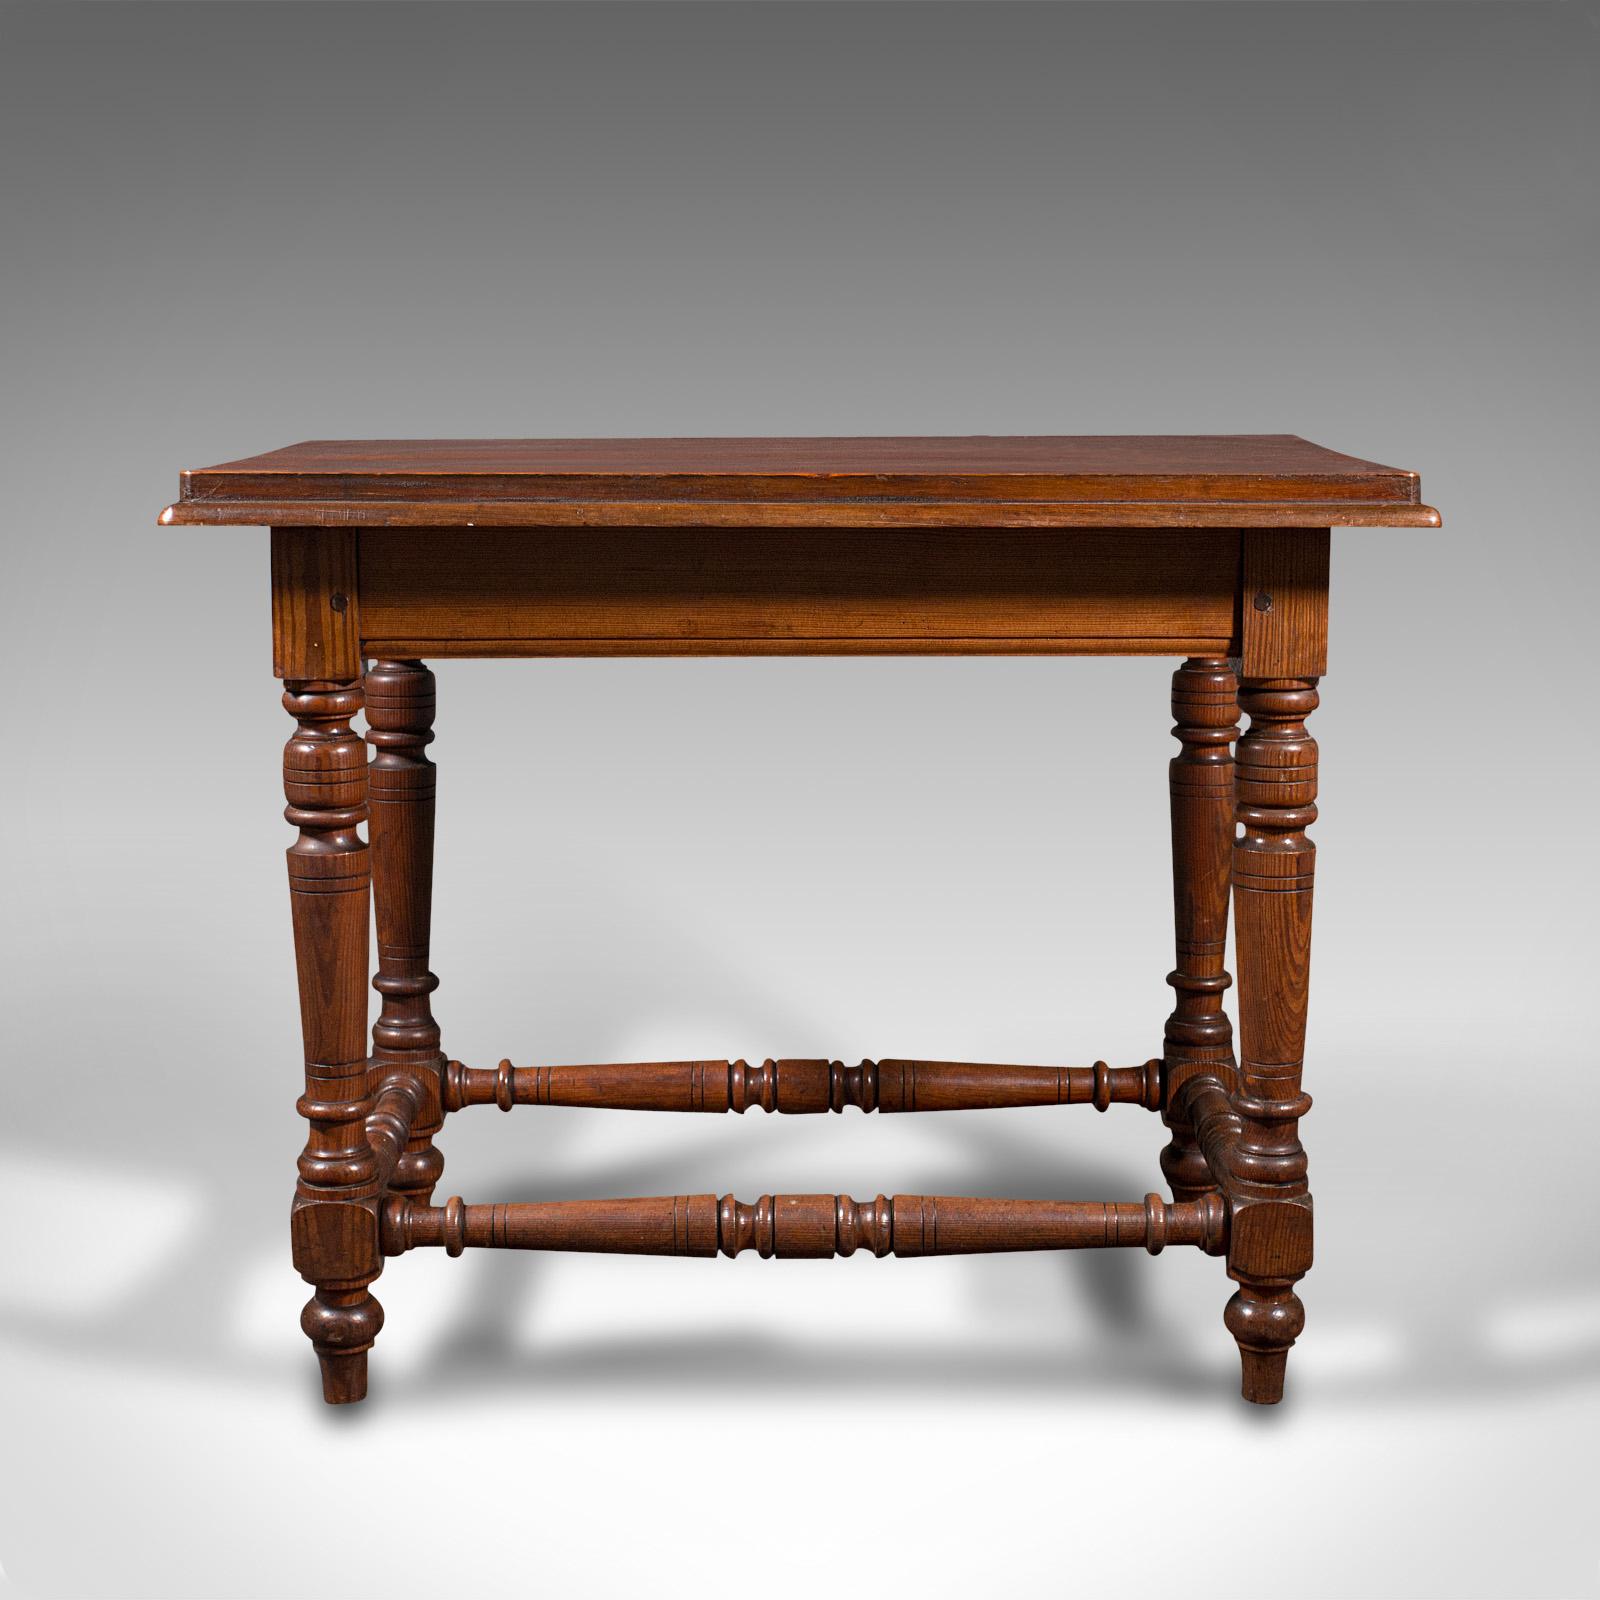 This is a small antique console table. An English, pitch pine ecclesiastical or side table, dating to the late Victorian period, circa 1880.

Pleasingly compact, whilst comfortably seating four persons
Displays a desirable aged patina and in good